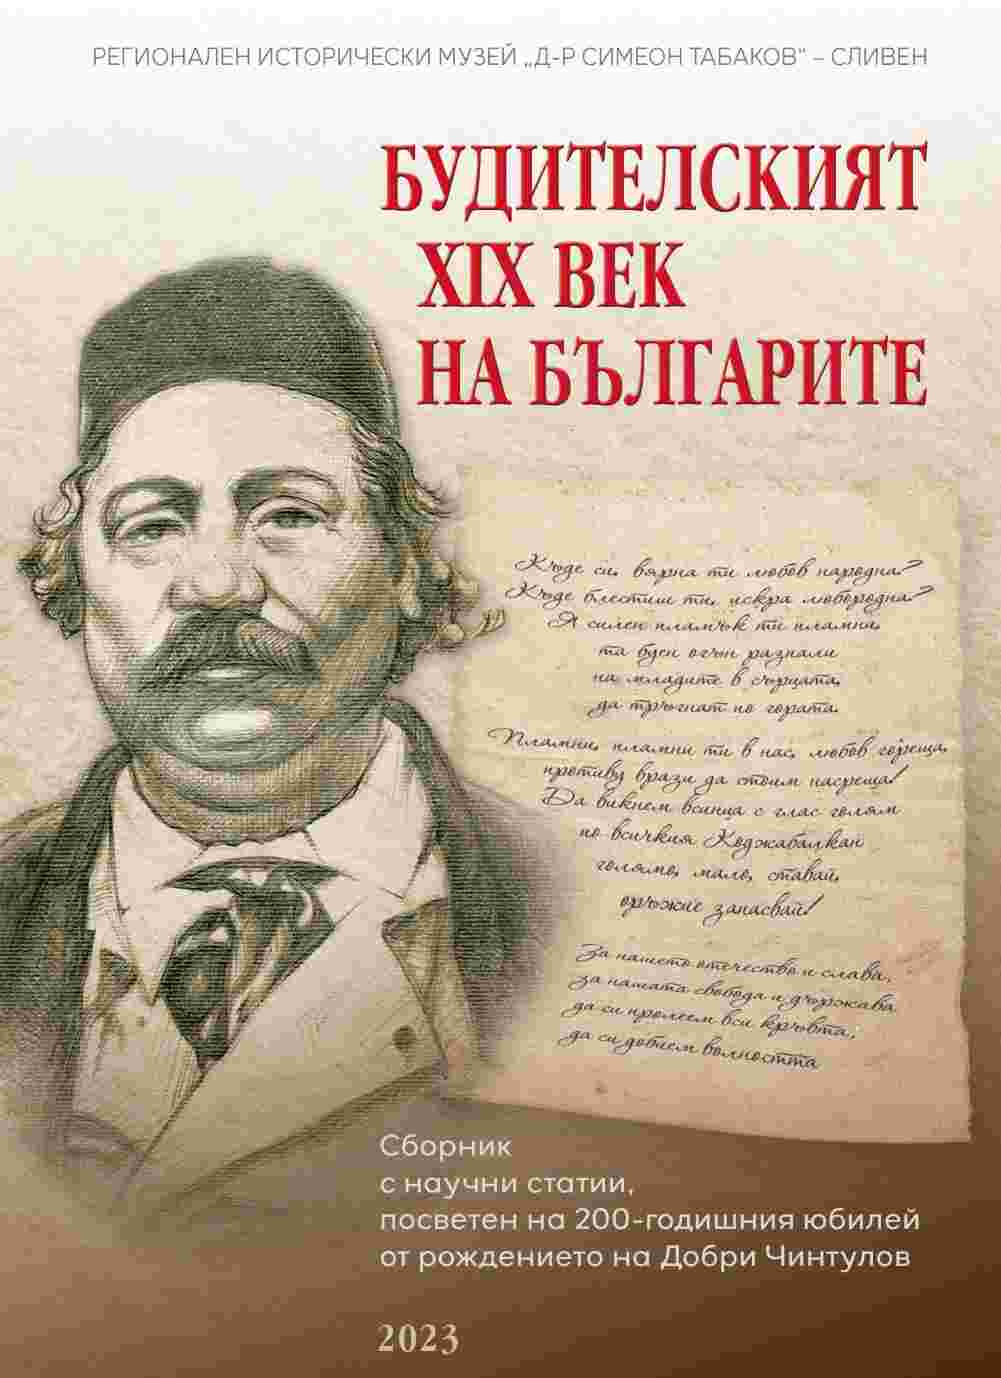 The Awakening 19th Century of the Bulgarians. A collection book of scientific articles dedicated to the 200th anniversary of the birth of Dobri Chintulov